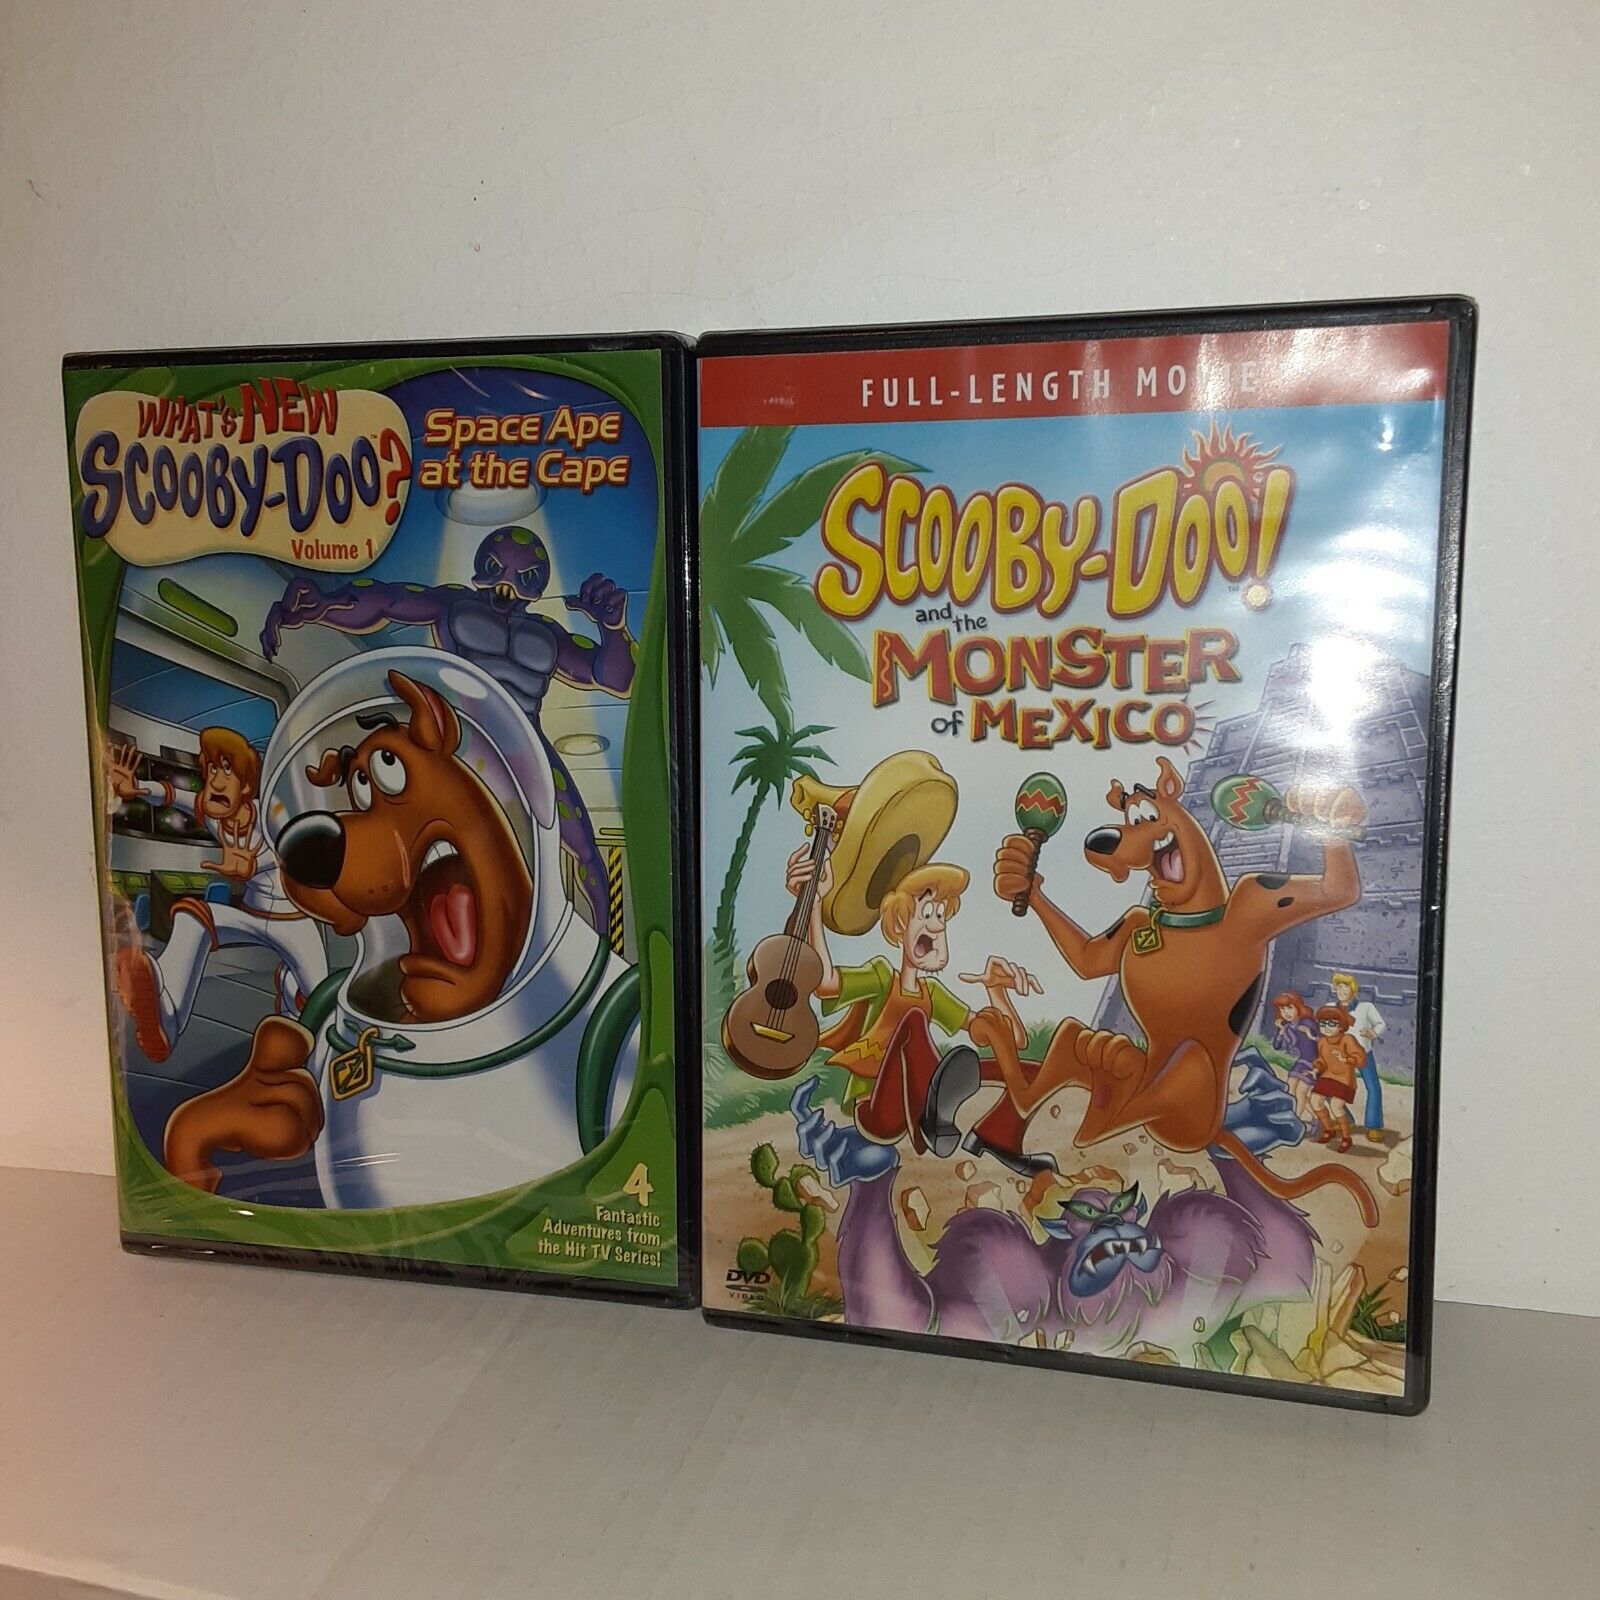 2 Scooby-Doo DVDS New / Sealed Movies Animation Free Shipping 14764257624 |  eBay